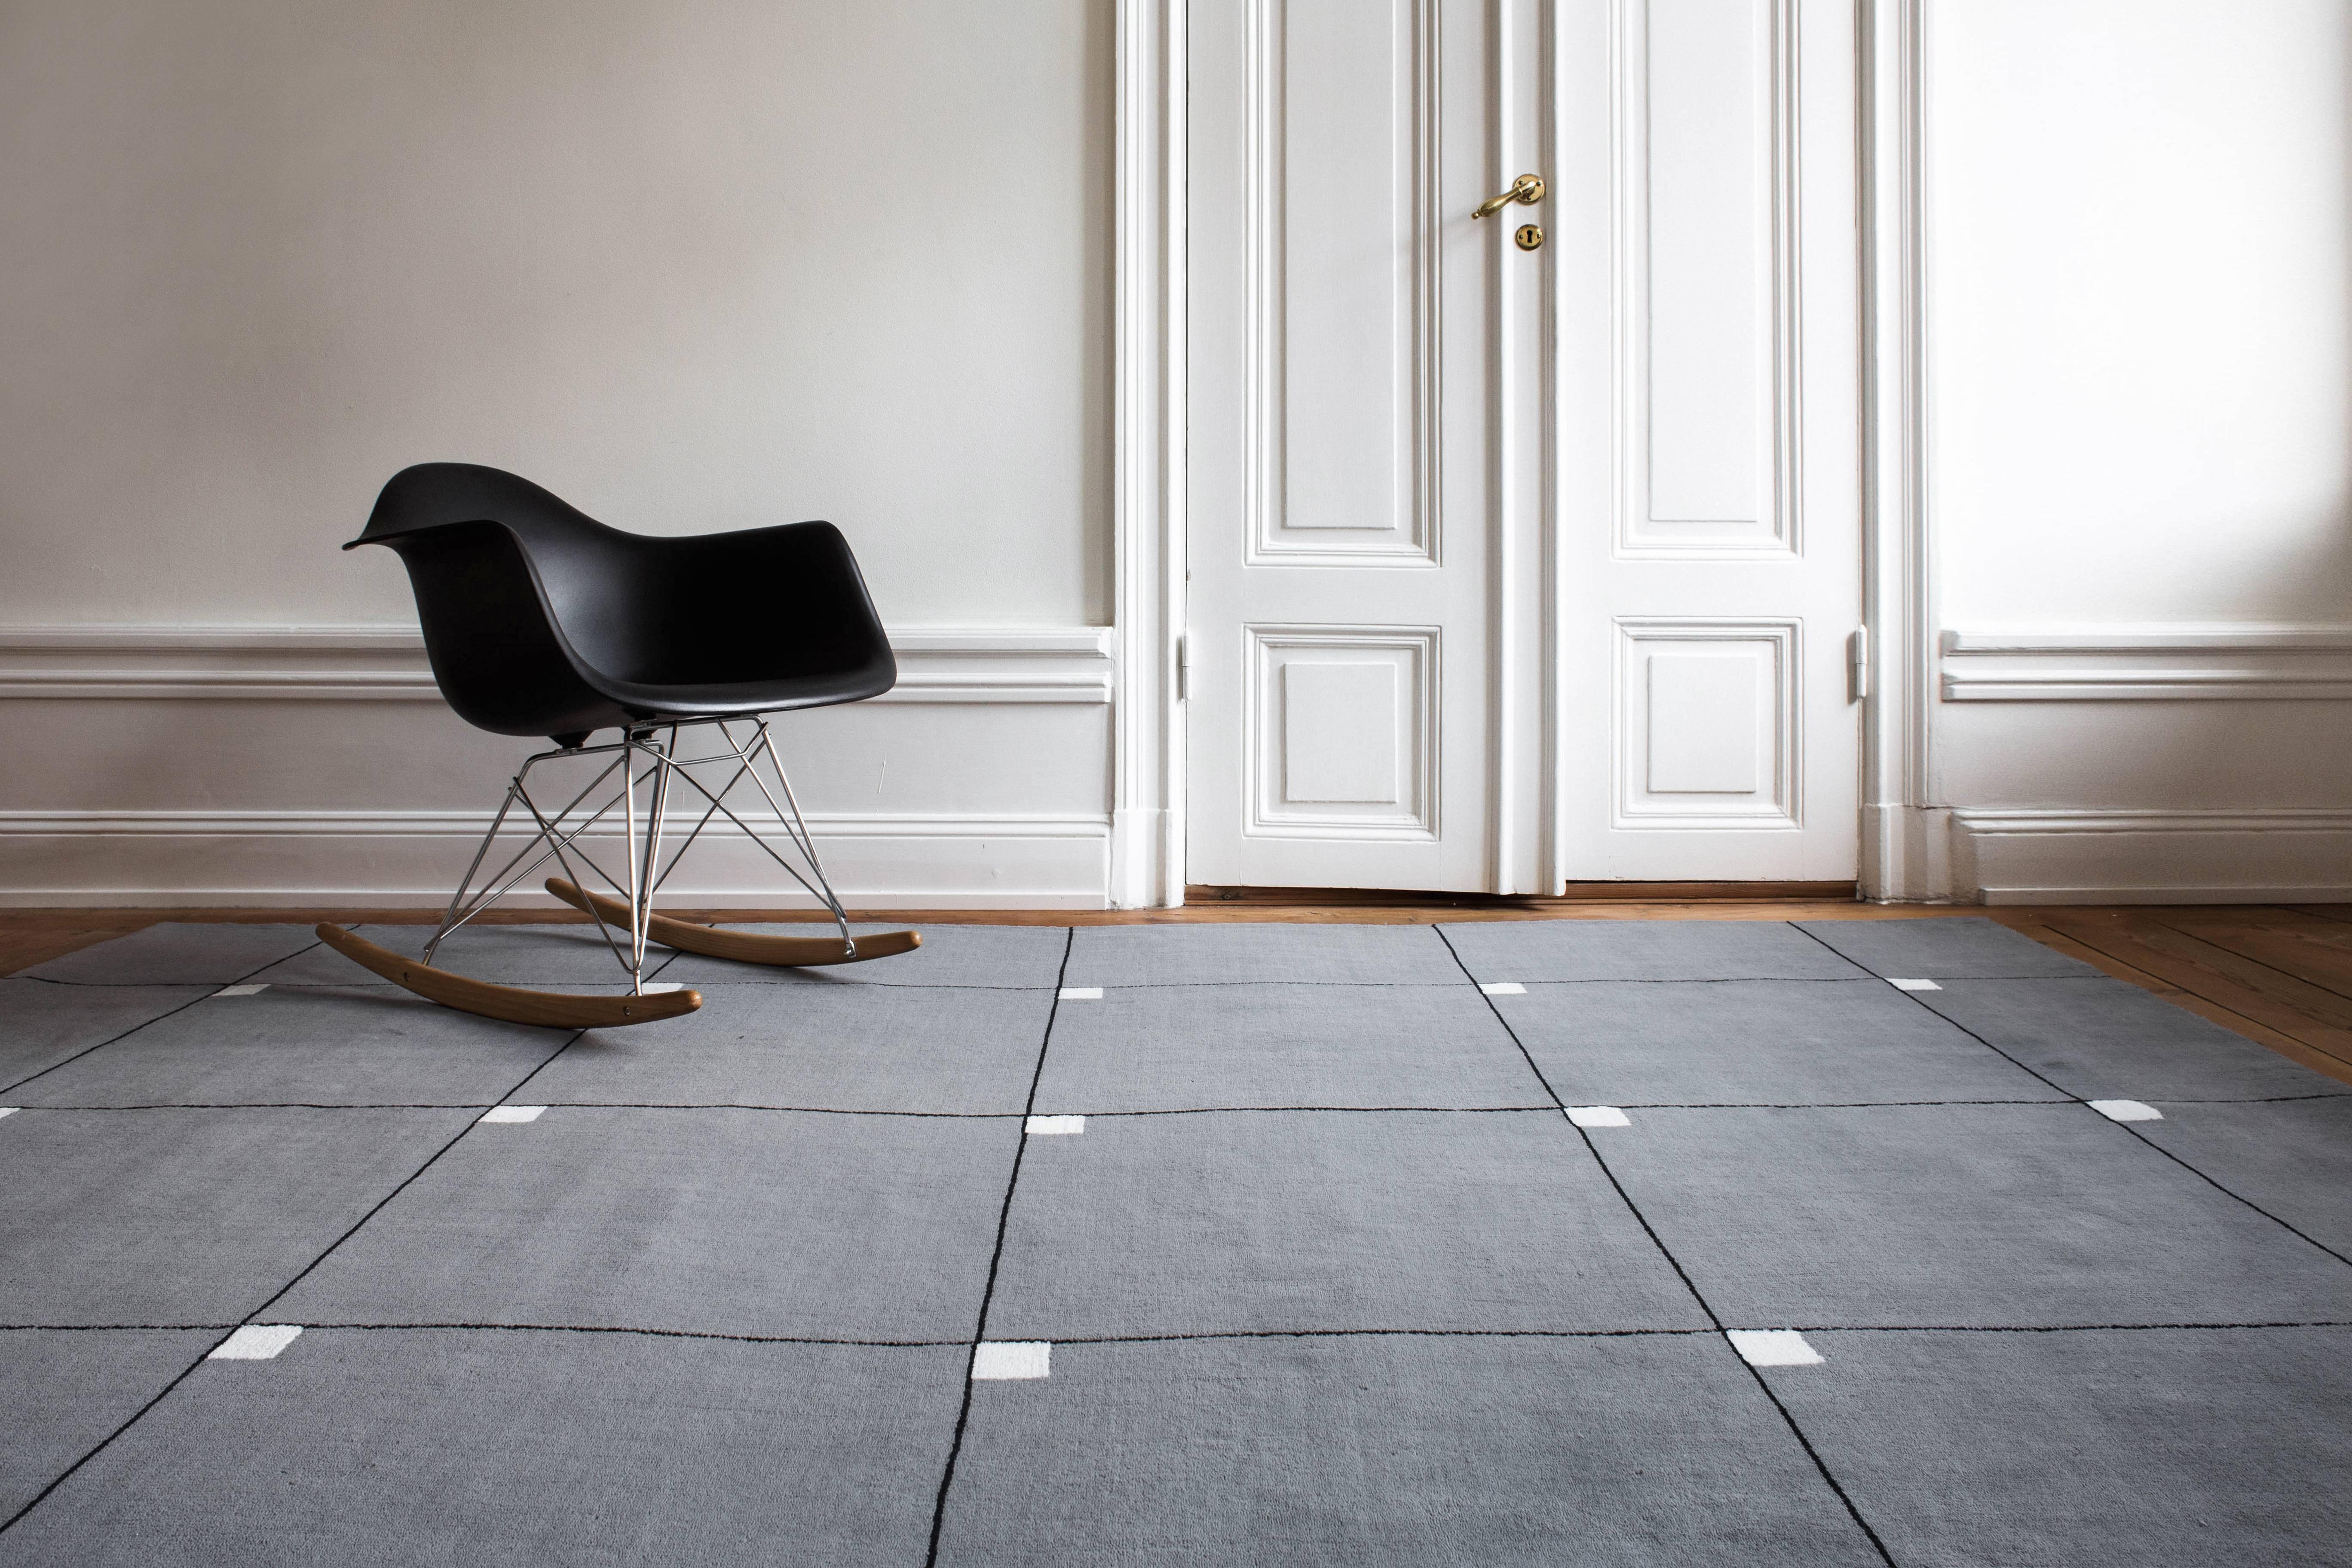 Modern, Gray. The timeless elegance of an early 20th century Swedish design inspired this collection. We’d like to think of it as a piece of art, for your floor to give your room a modern touch.

This plush cut-pile rug is made with New Zealand wool